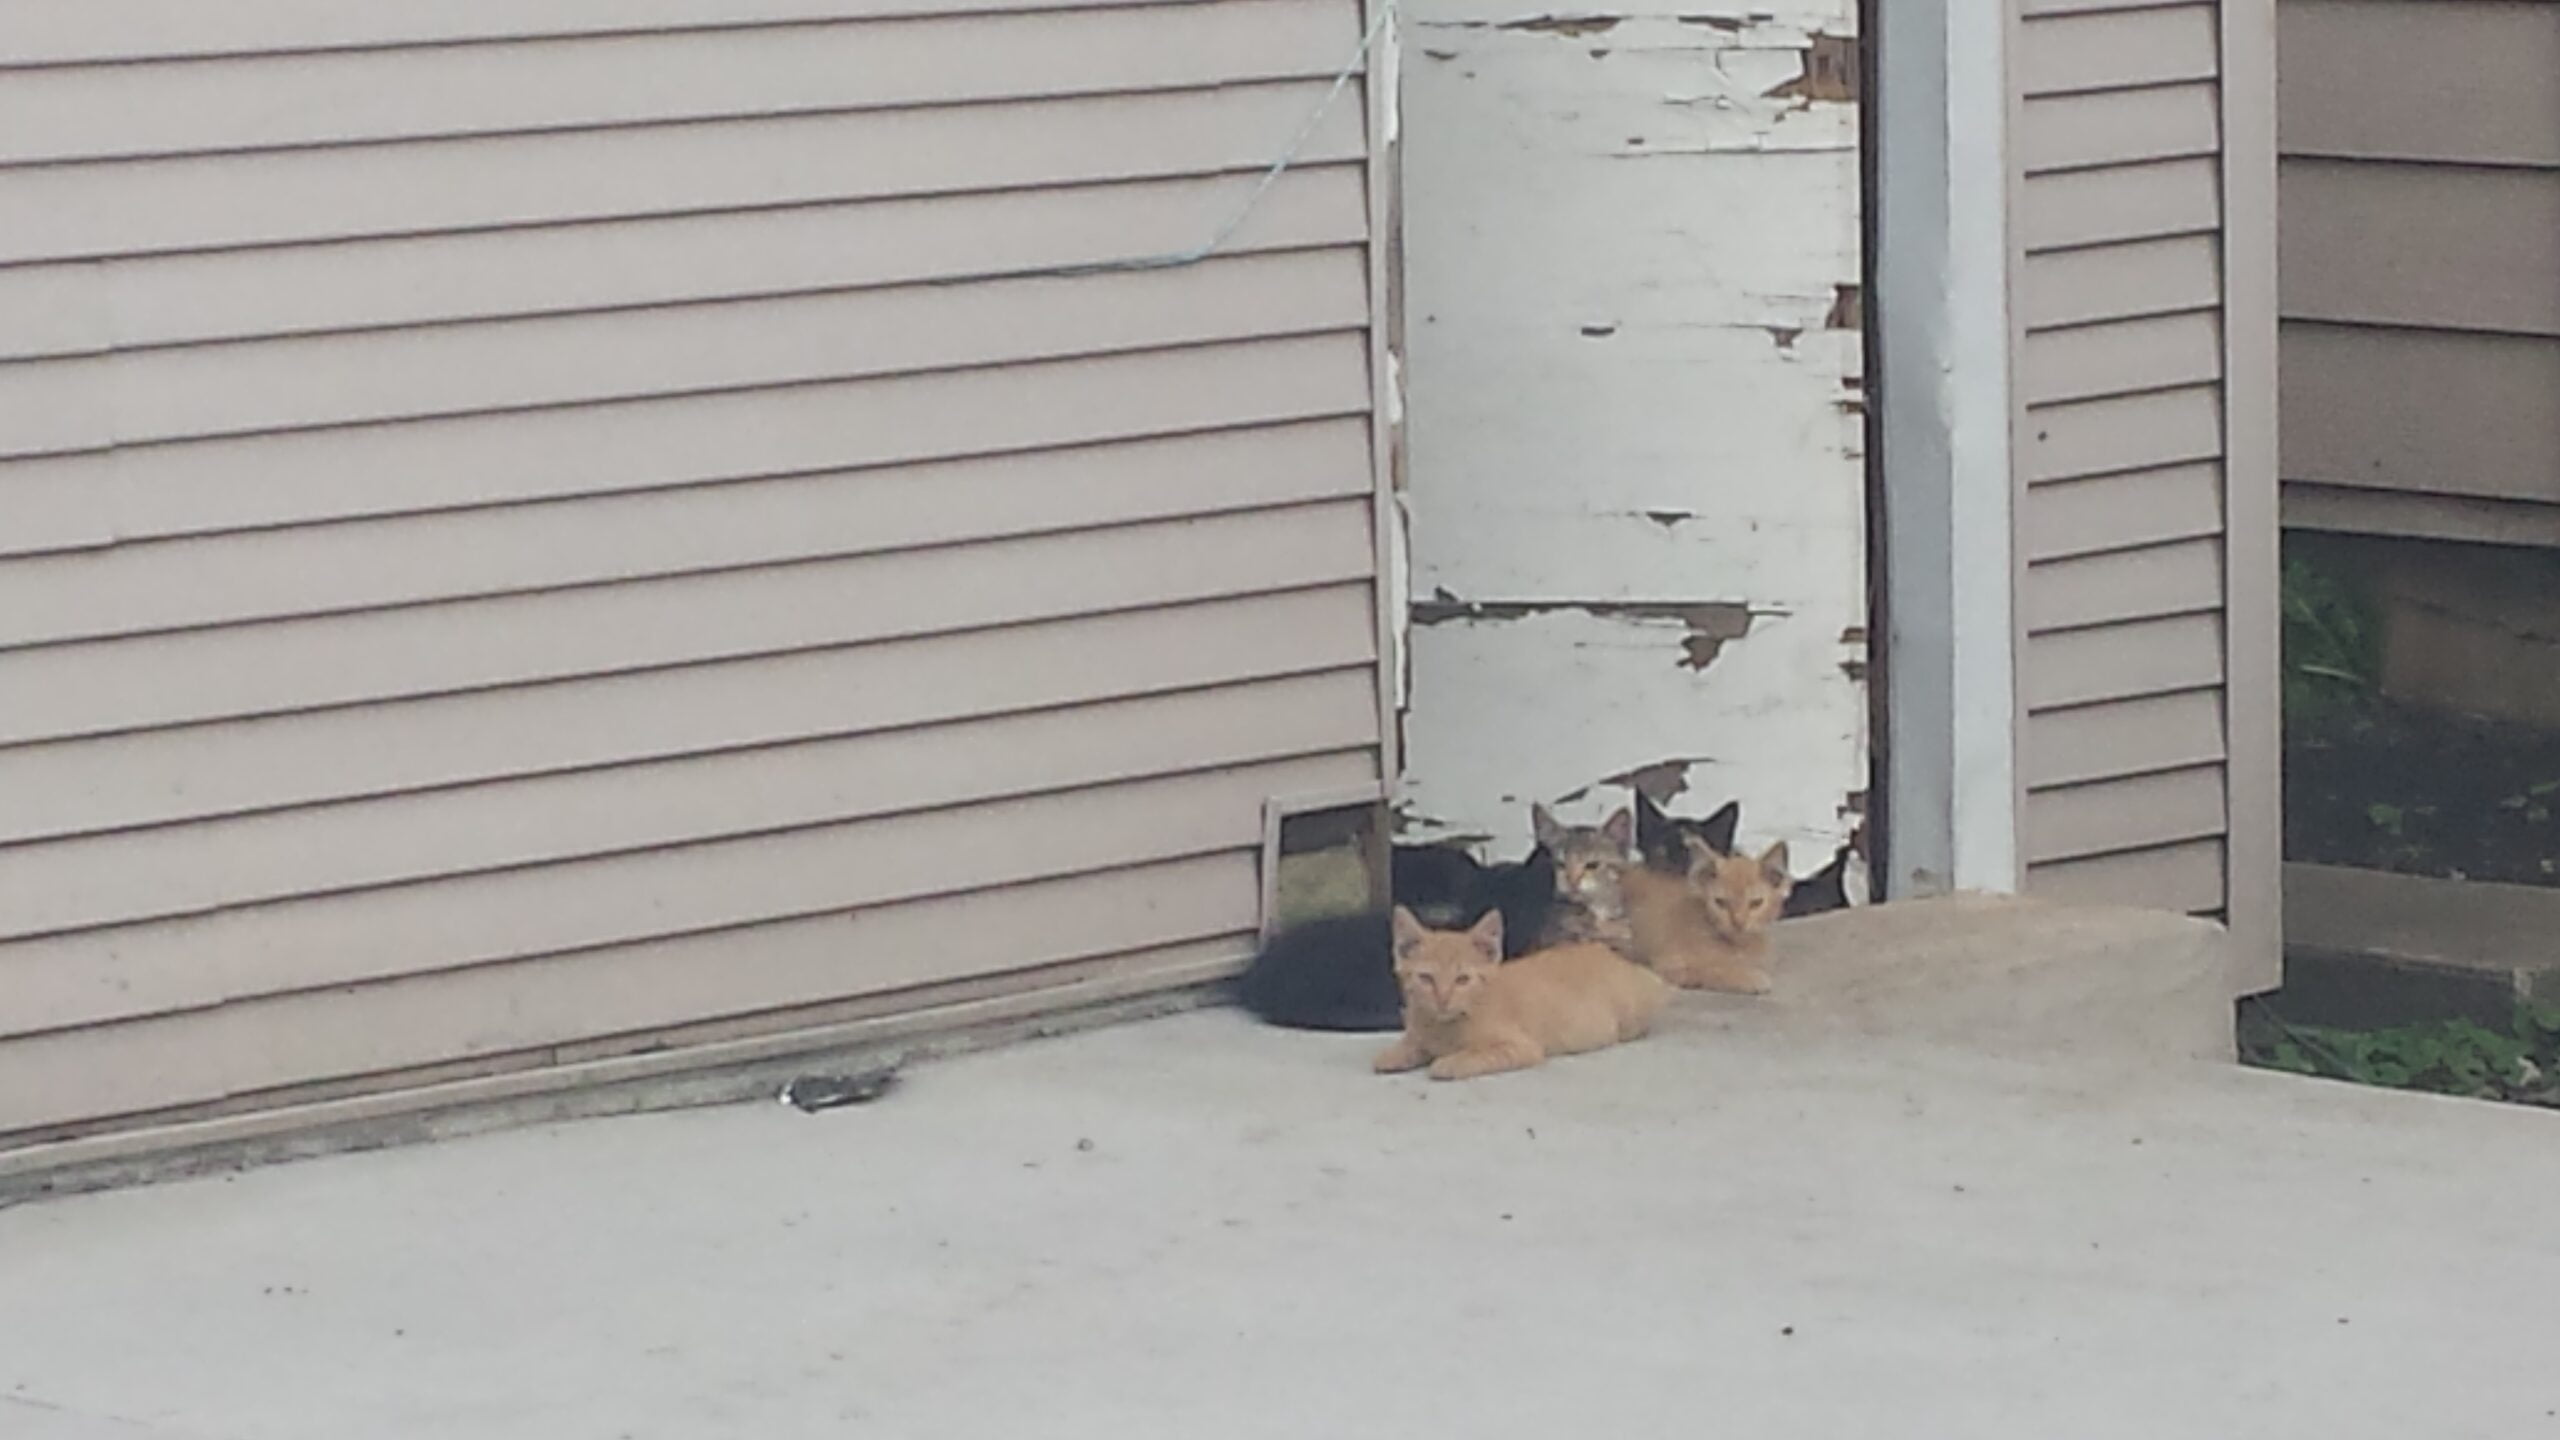 Stray cats outside looking for food